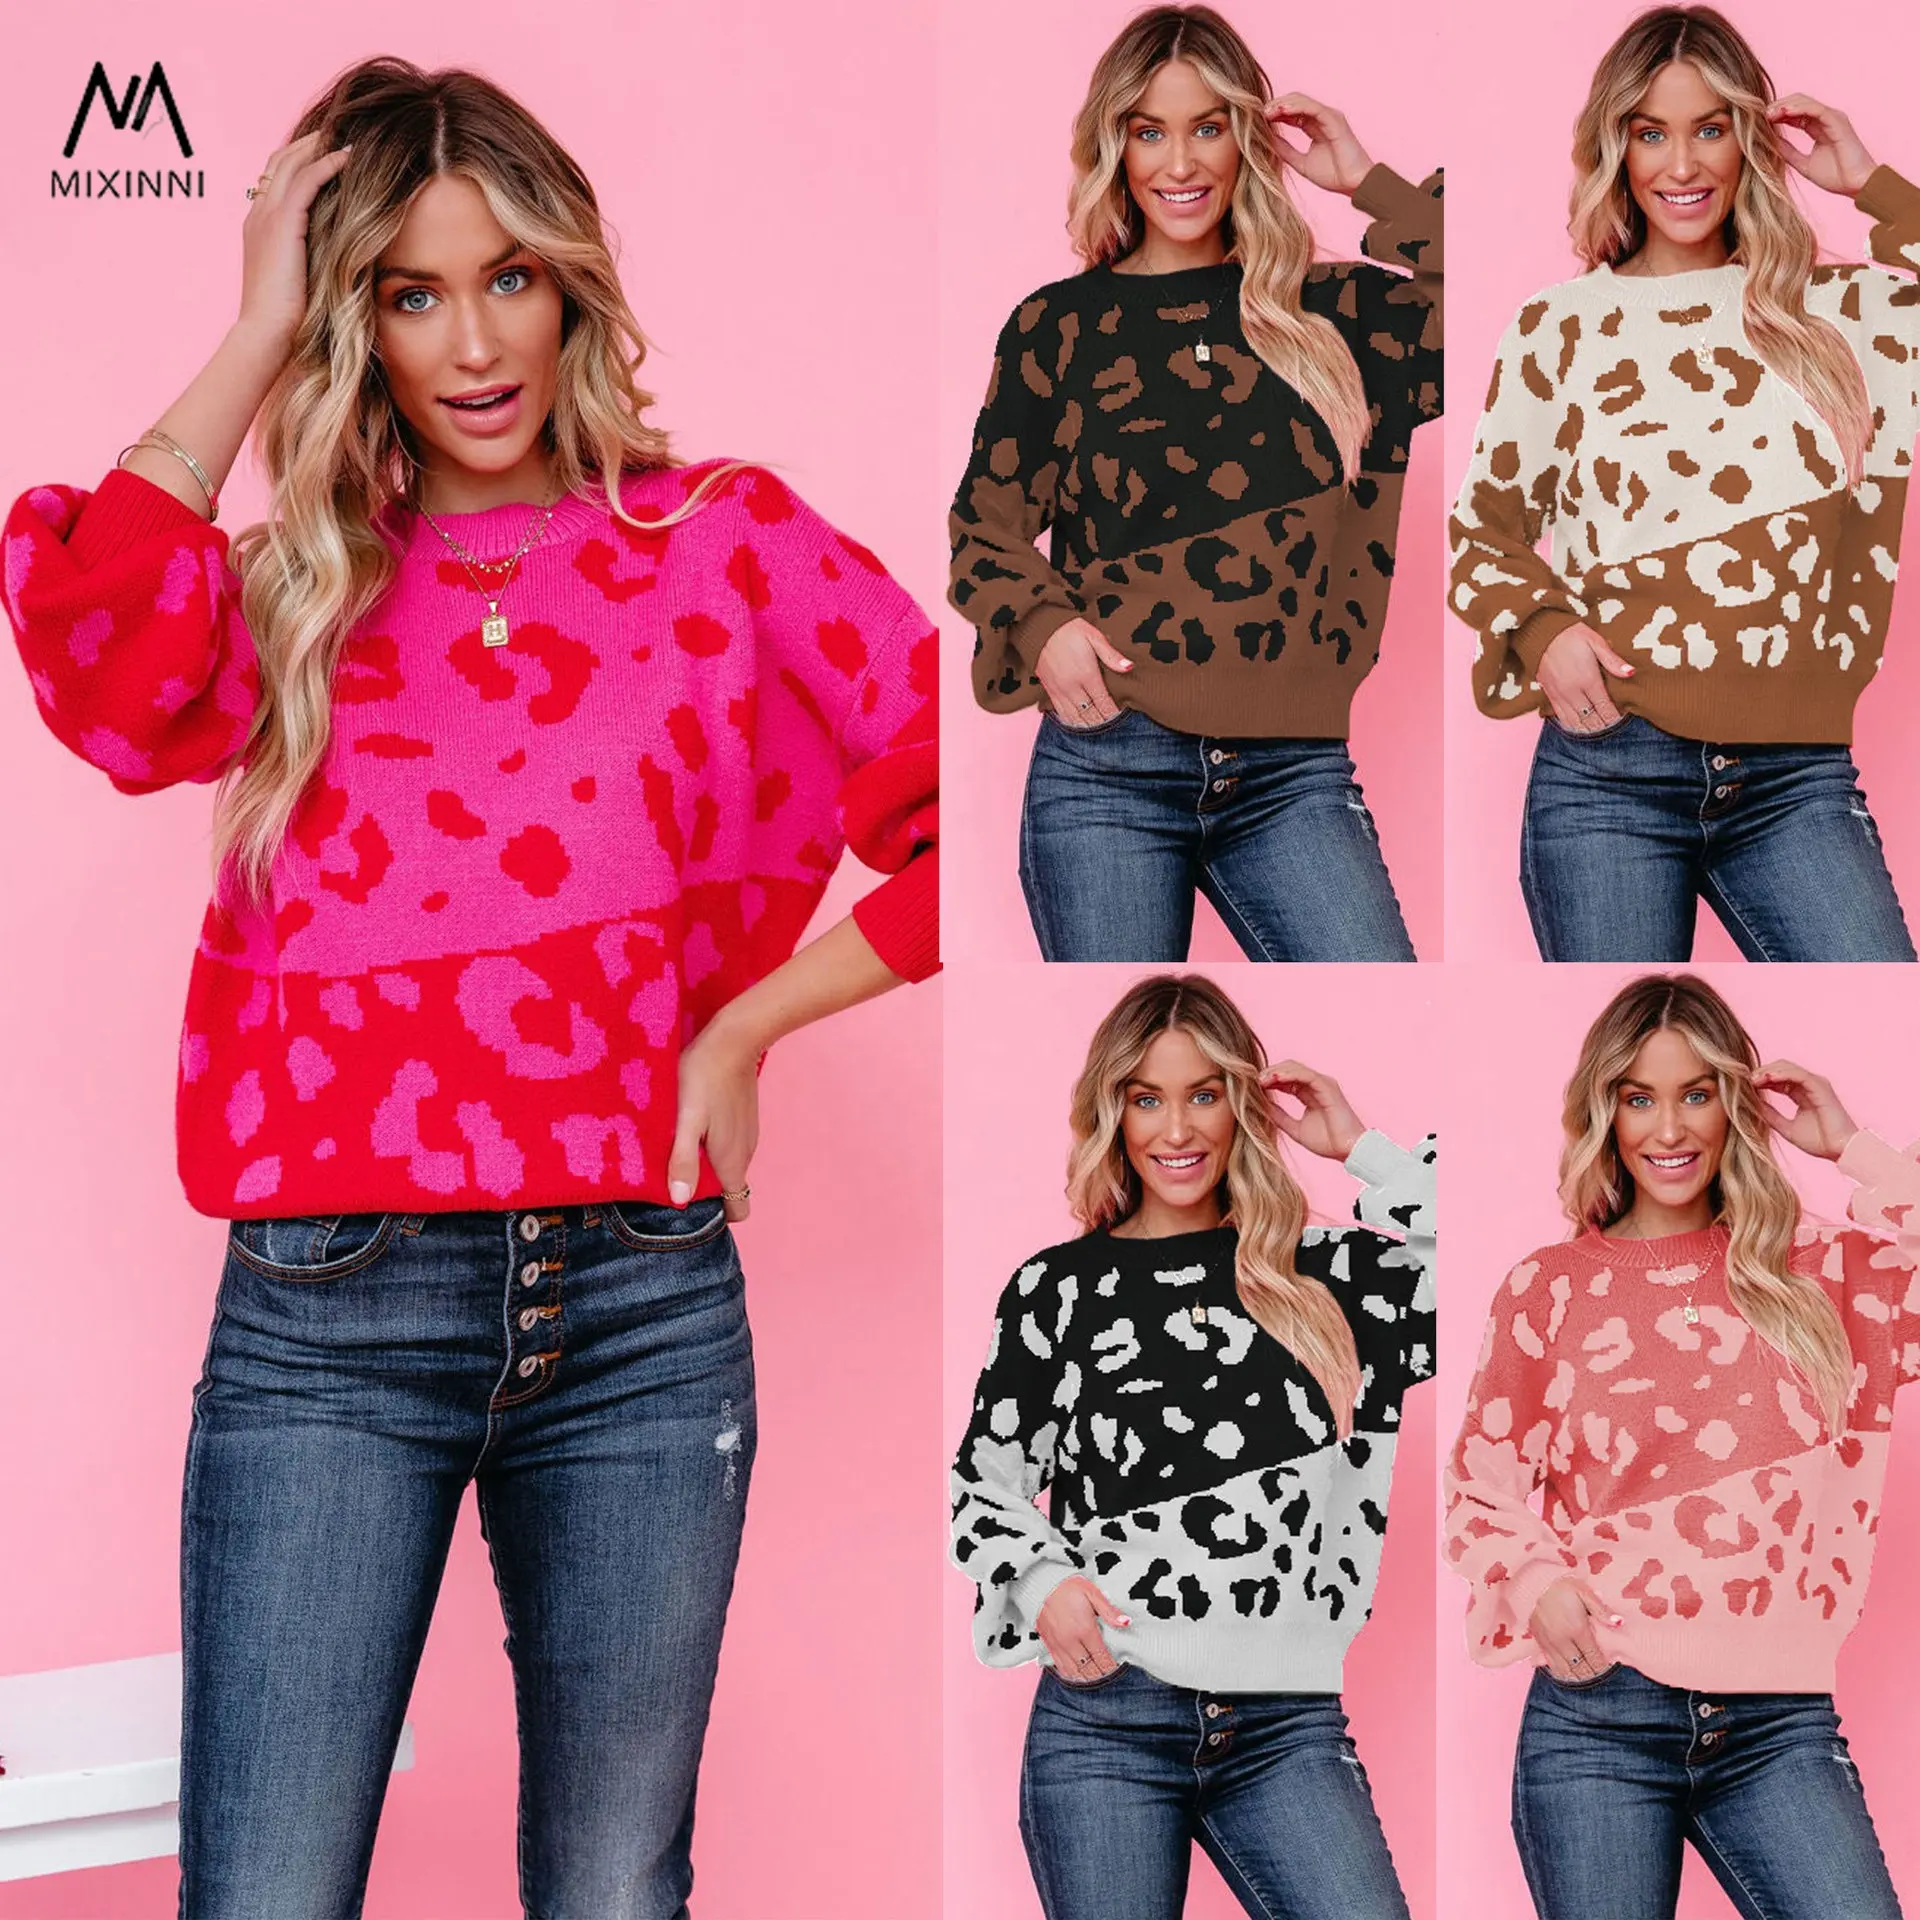 MXN SF1190 round neck leopard women's sweater,two-color patchwork knitted sweater,fashion women tops pullover sweater for women